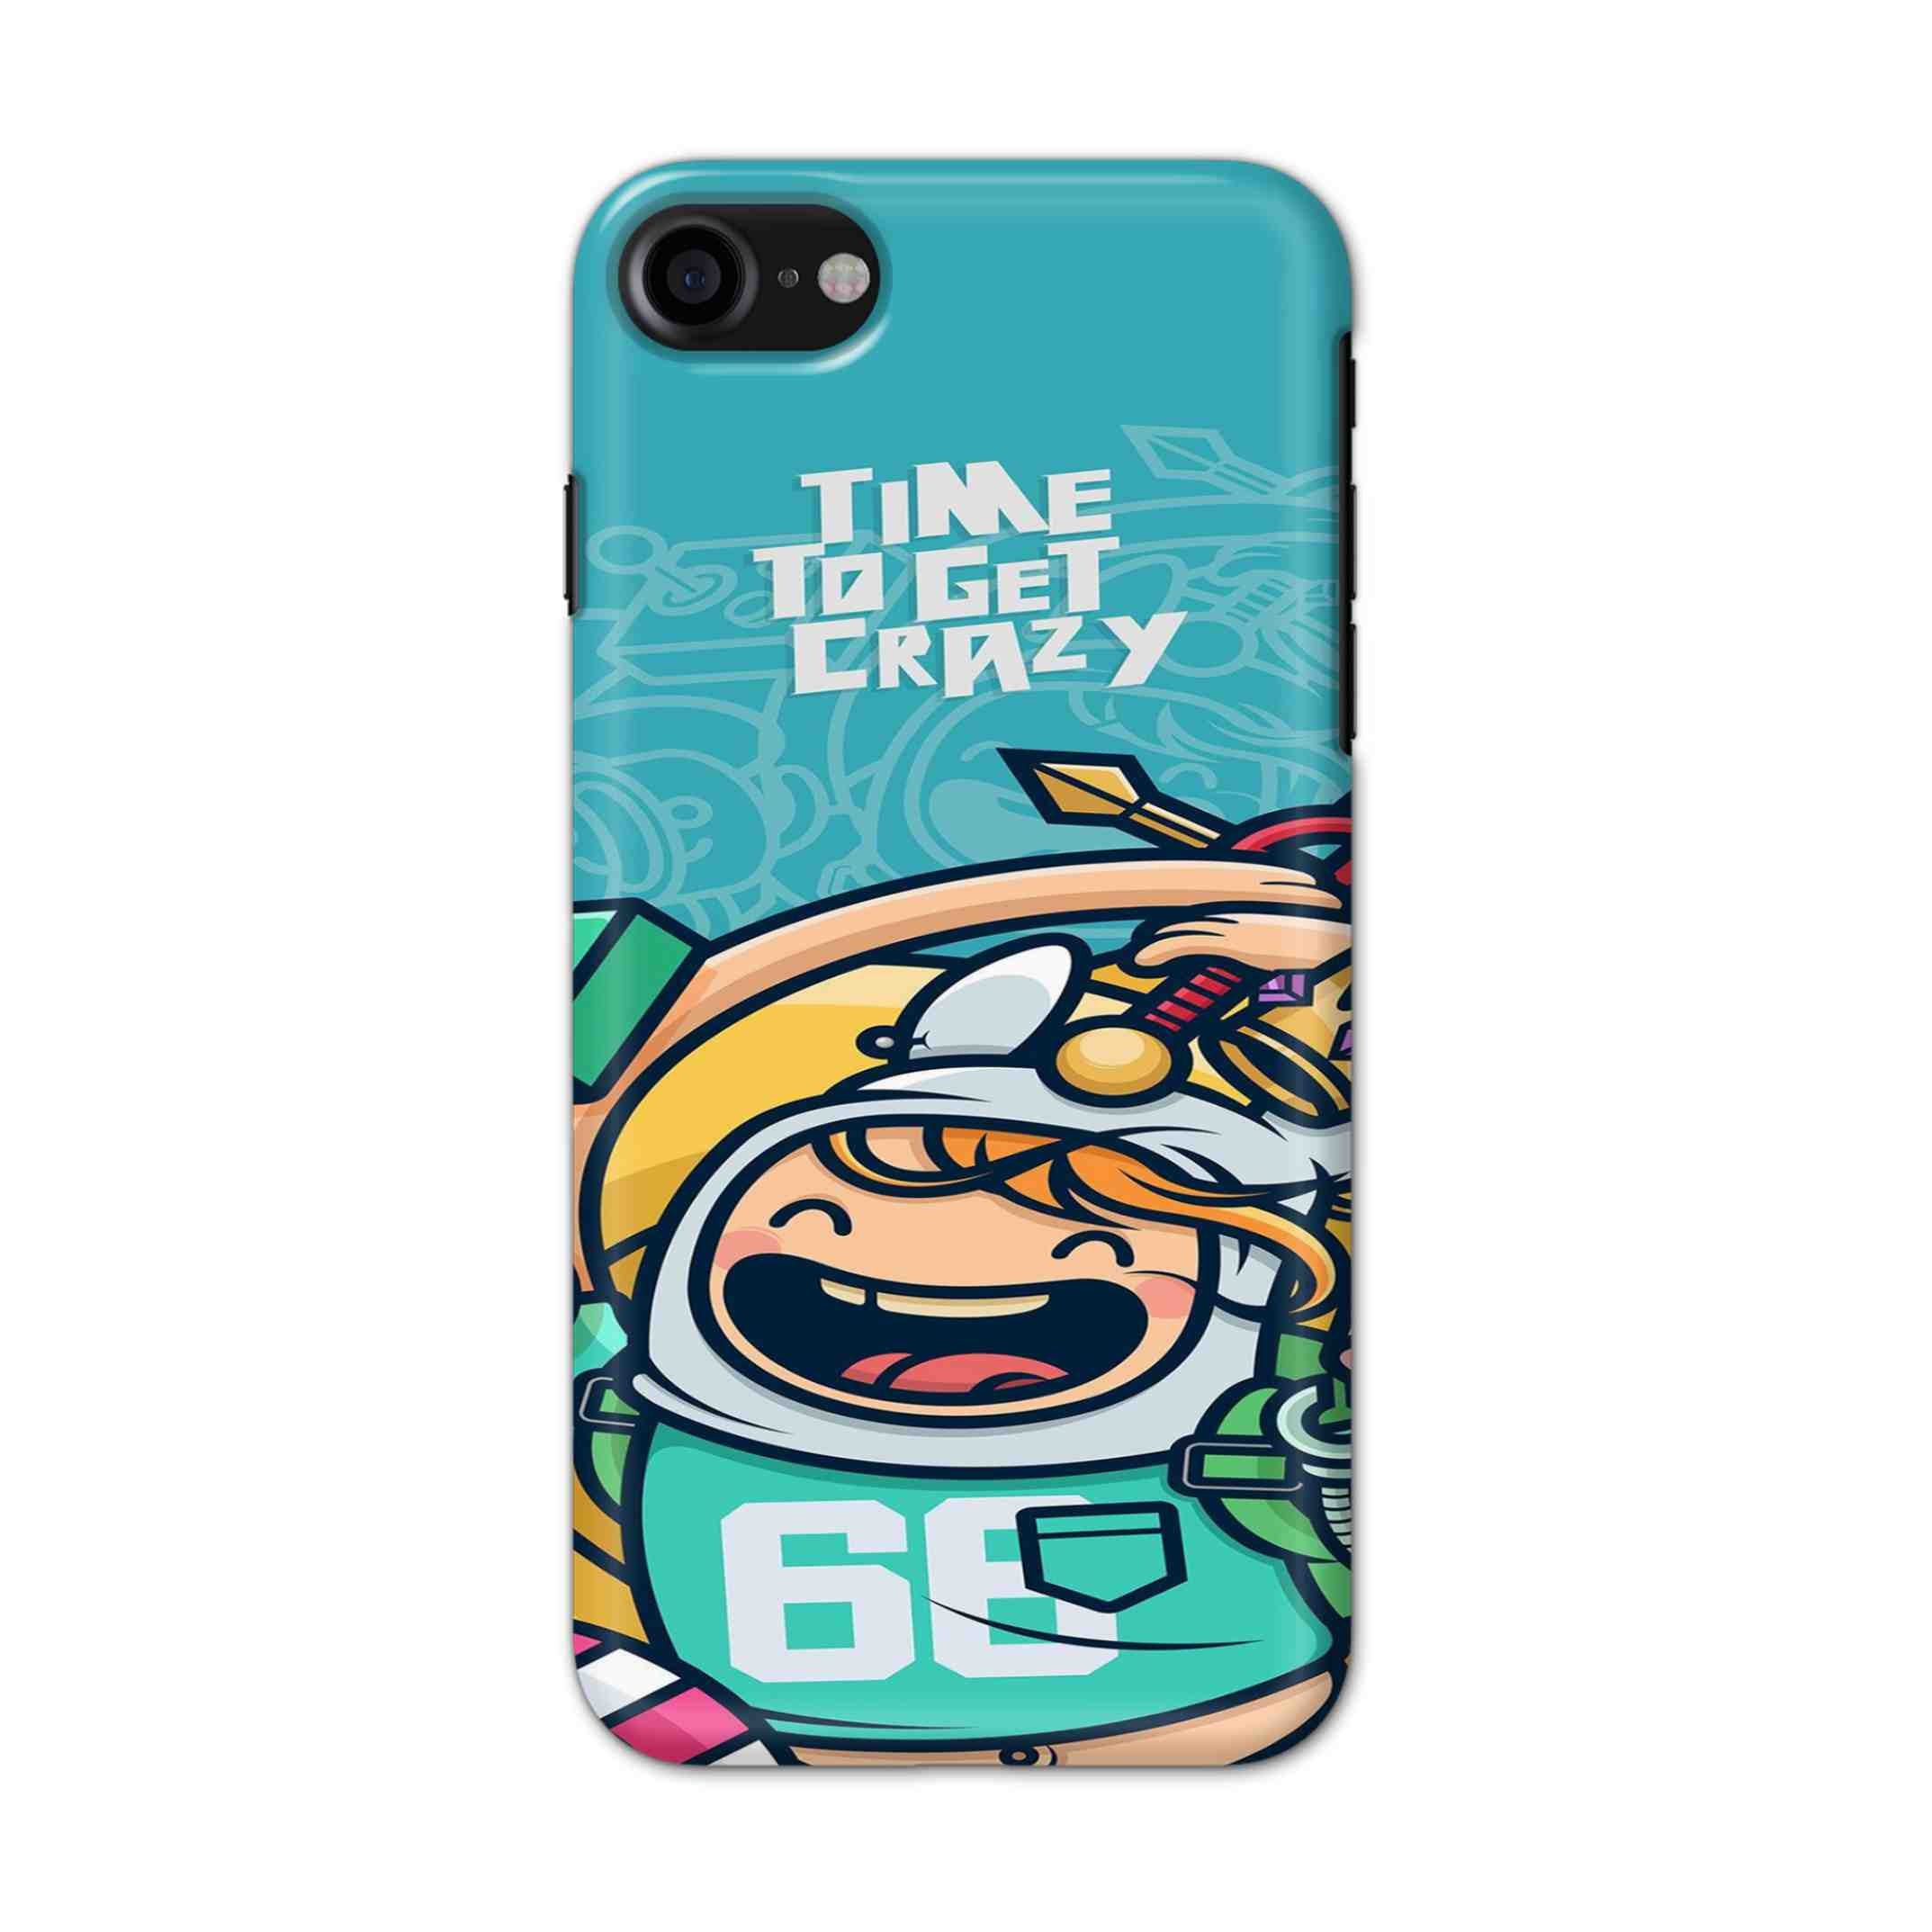 Buy Time To Get Crazy Hard Back Mobile Phone Case/Cover For iPhone 7 / 8 Online